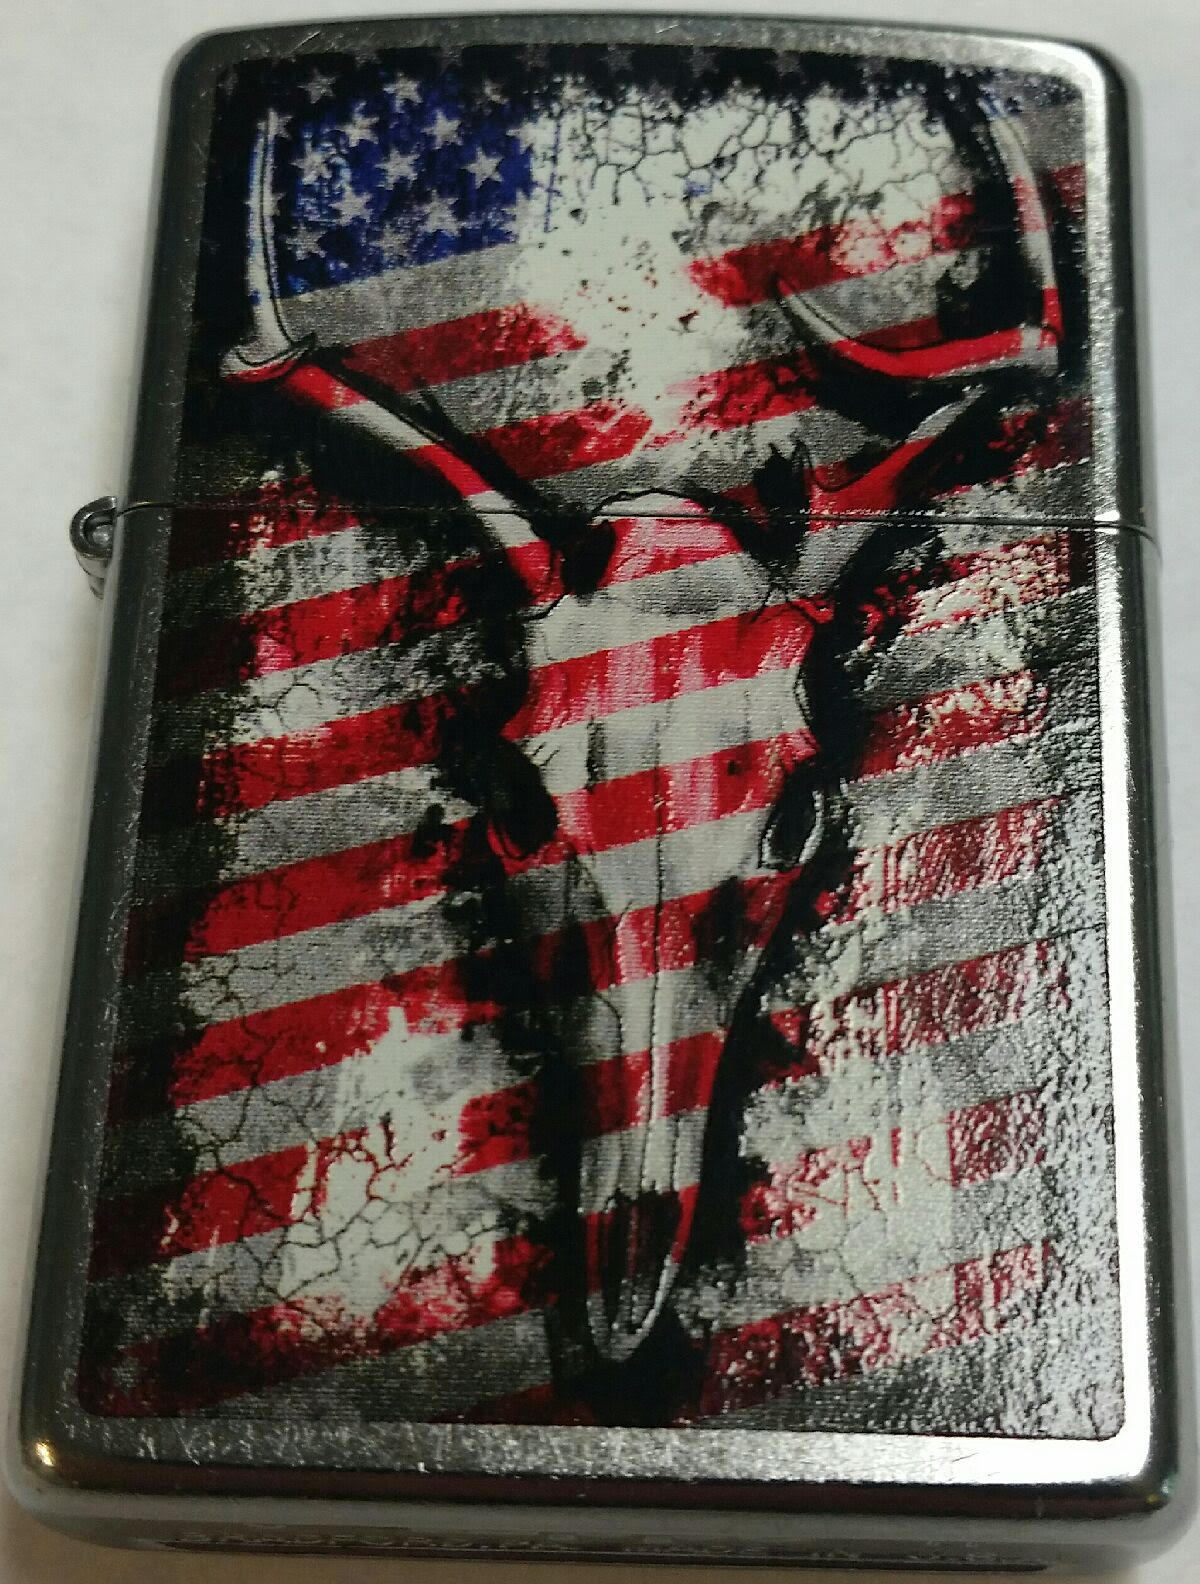 https://jackrabbitsvintage.com/wp-content/uploads/imported/1/Zippo-lighter-PIPE-Skull-Flag-Limited-Edition-New-In-Box-Stars-and-Stripes-123155998491-9.JPG